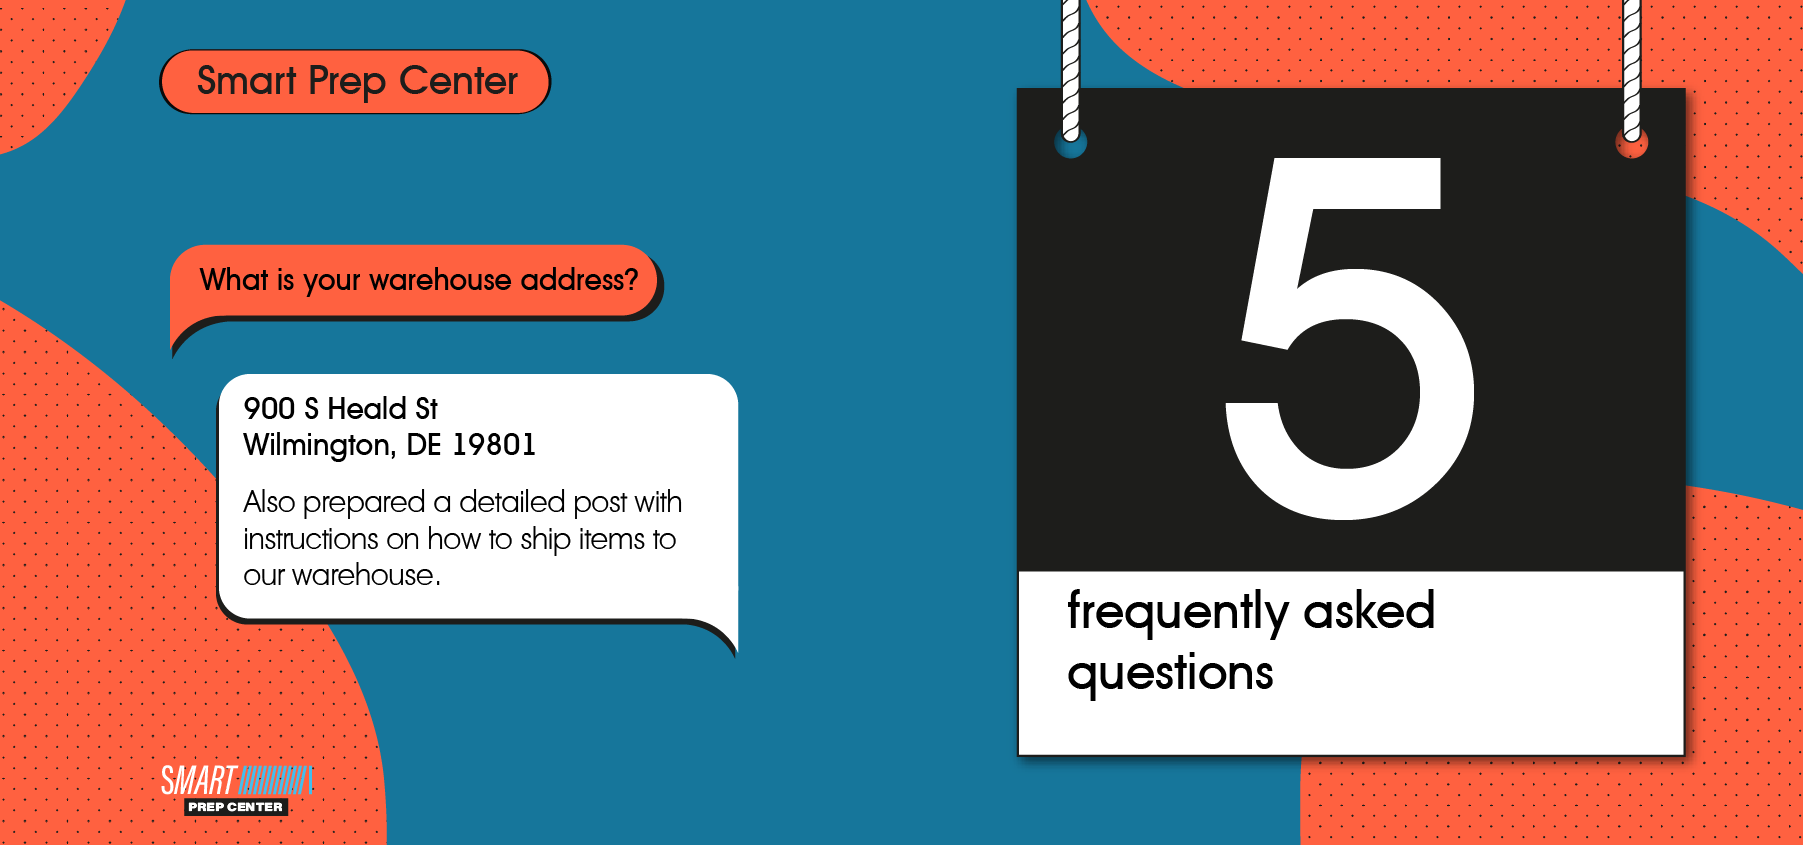 5 frequently asked questions